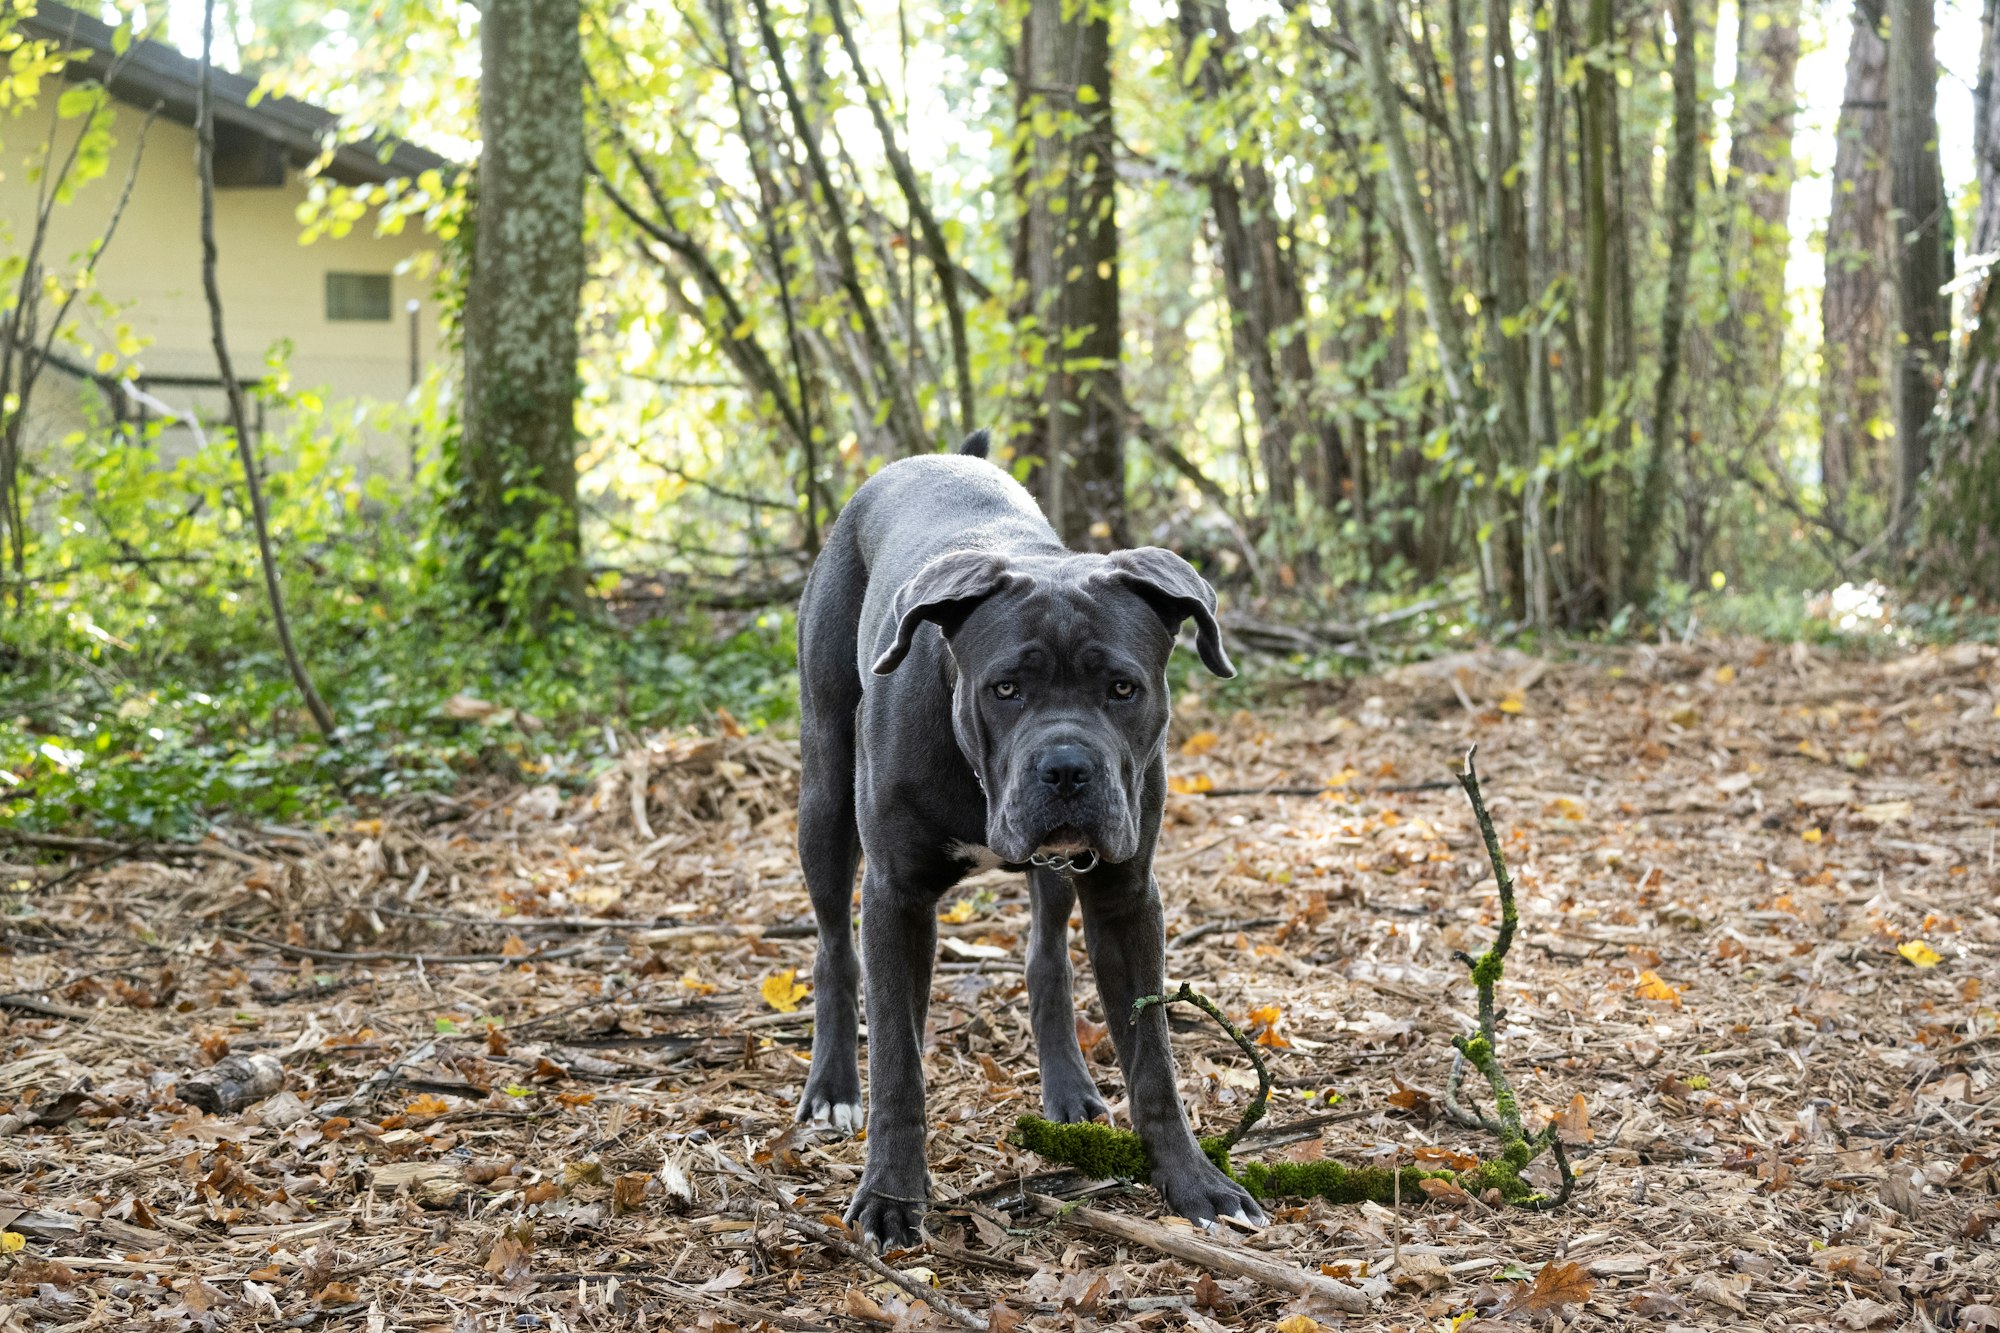 Cane Corso puppy stance in the forest